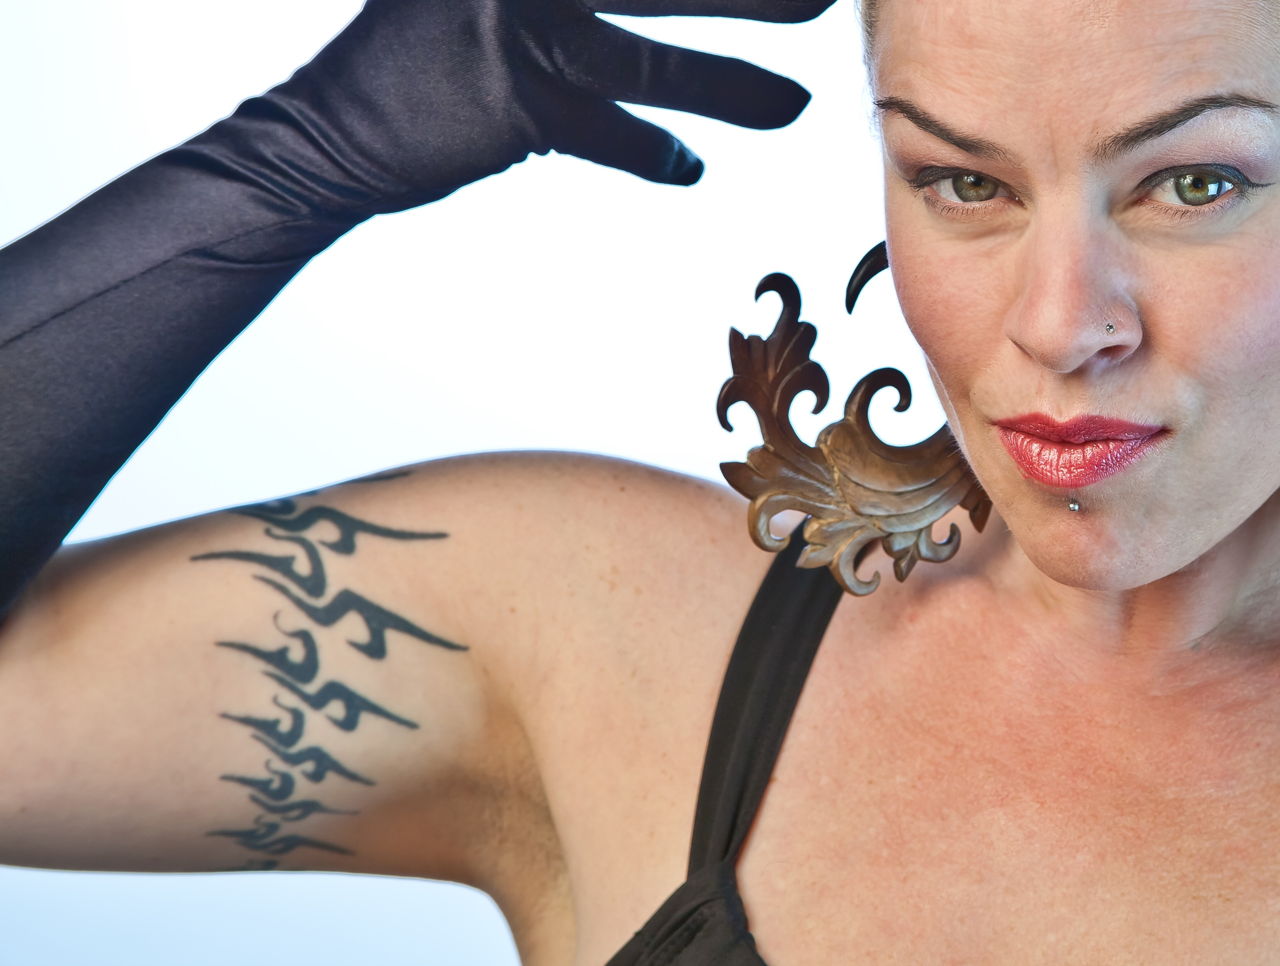 Surprising! What Men Really Think of Women With Tattoos - Thoughtful